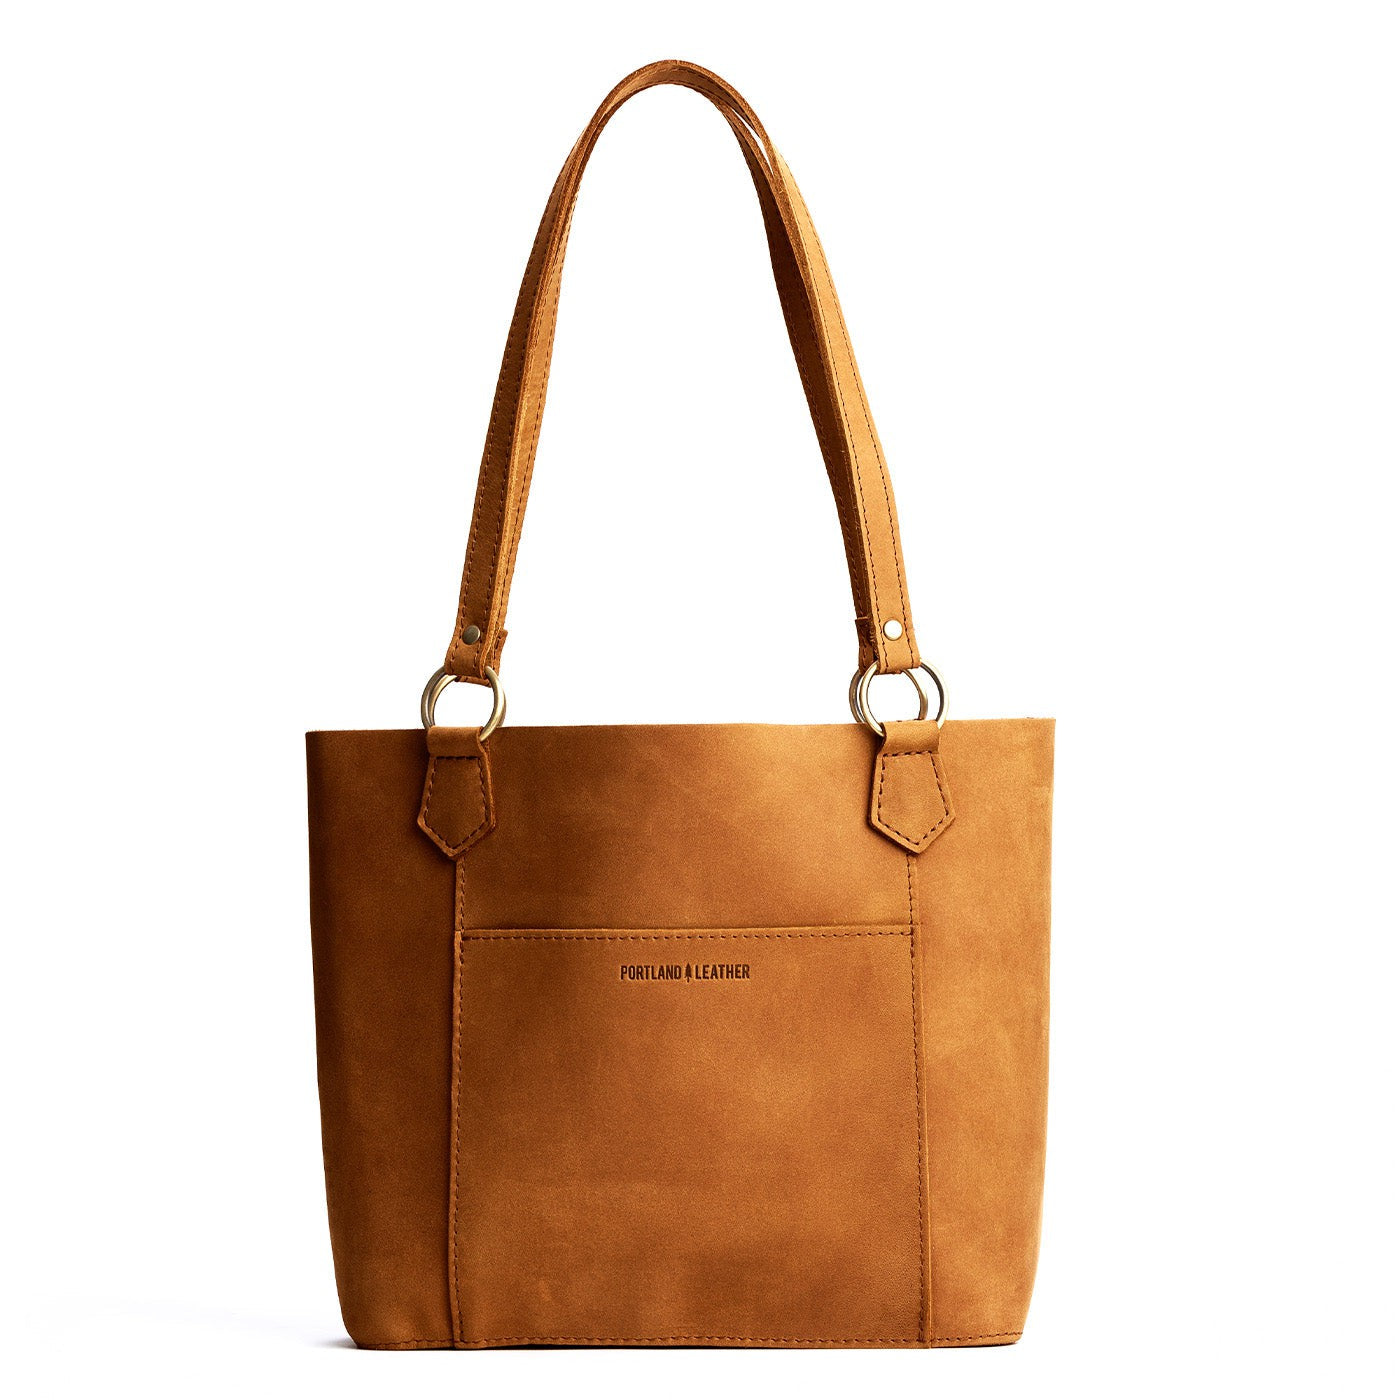 'Almost Perfect' The Market Tote